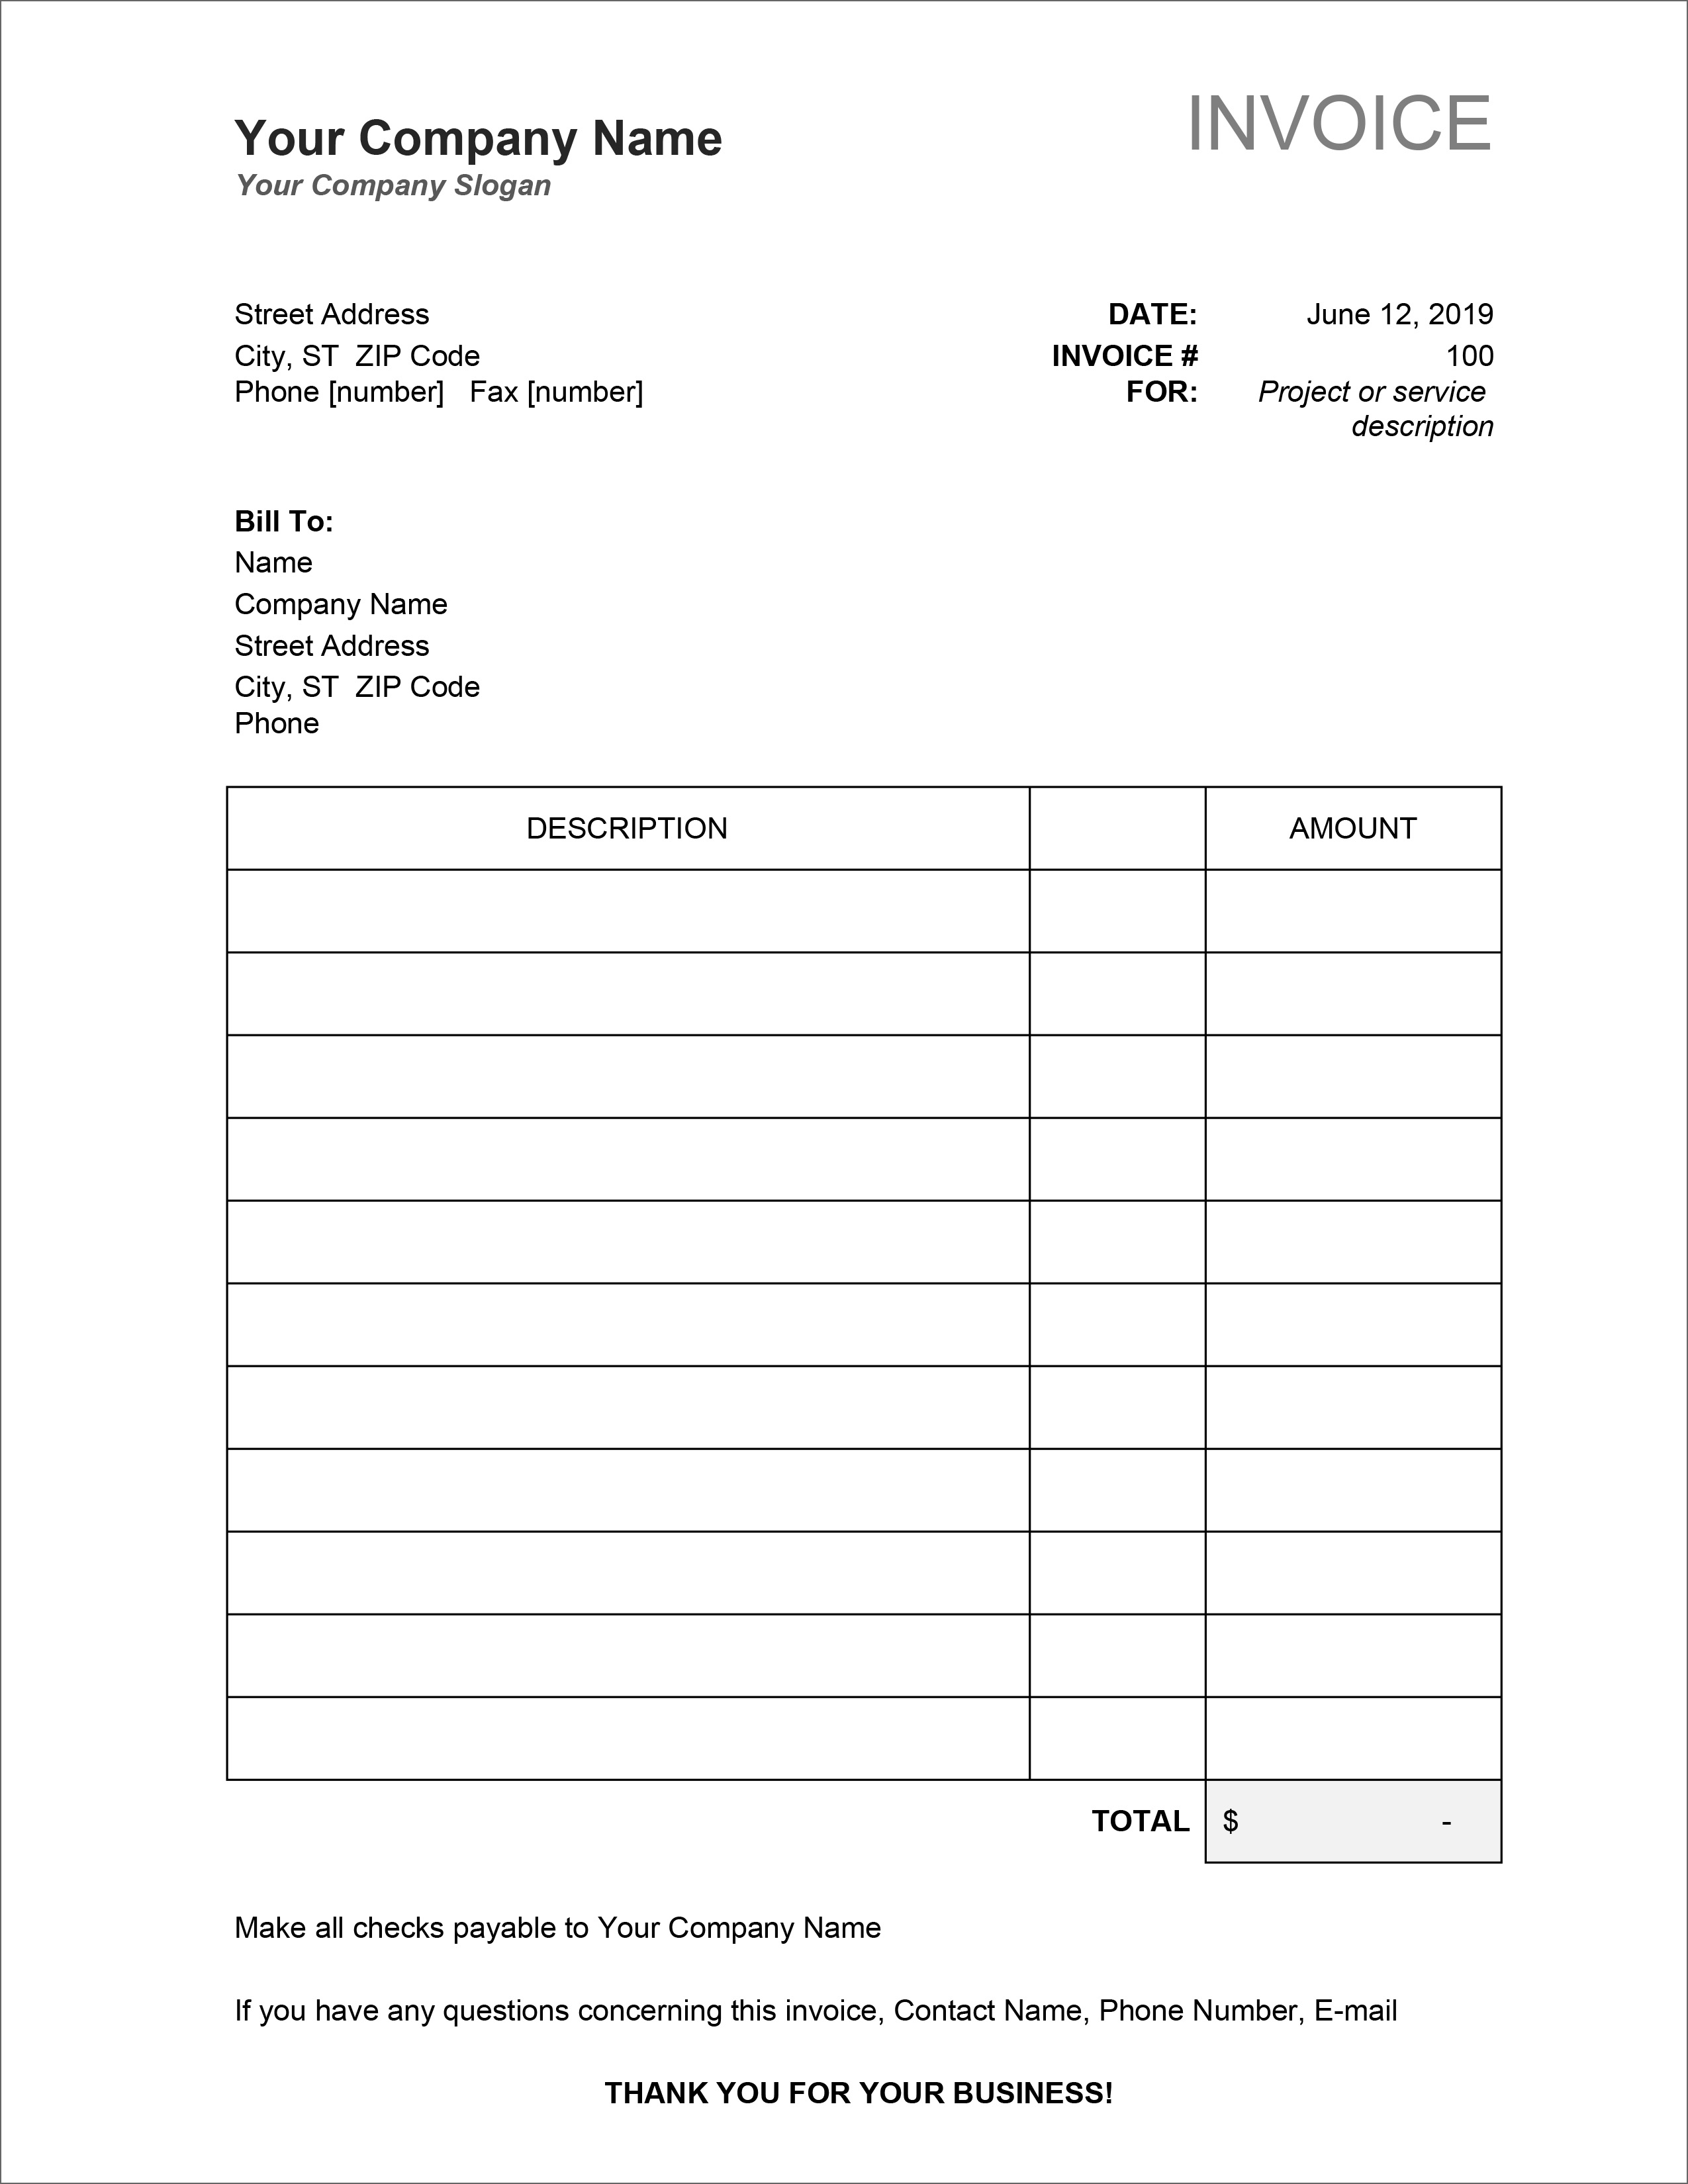 32-free-invoice-templates-in-microsoft-excel-and-docx-formats